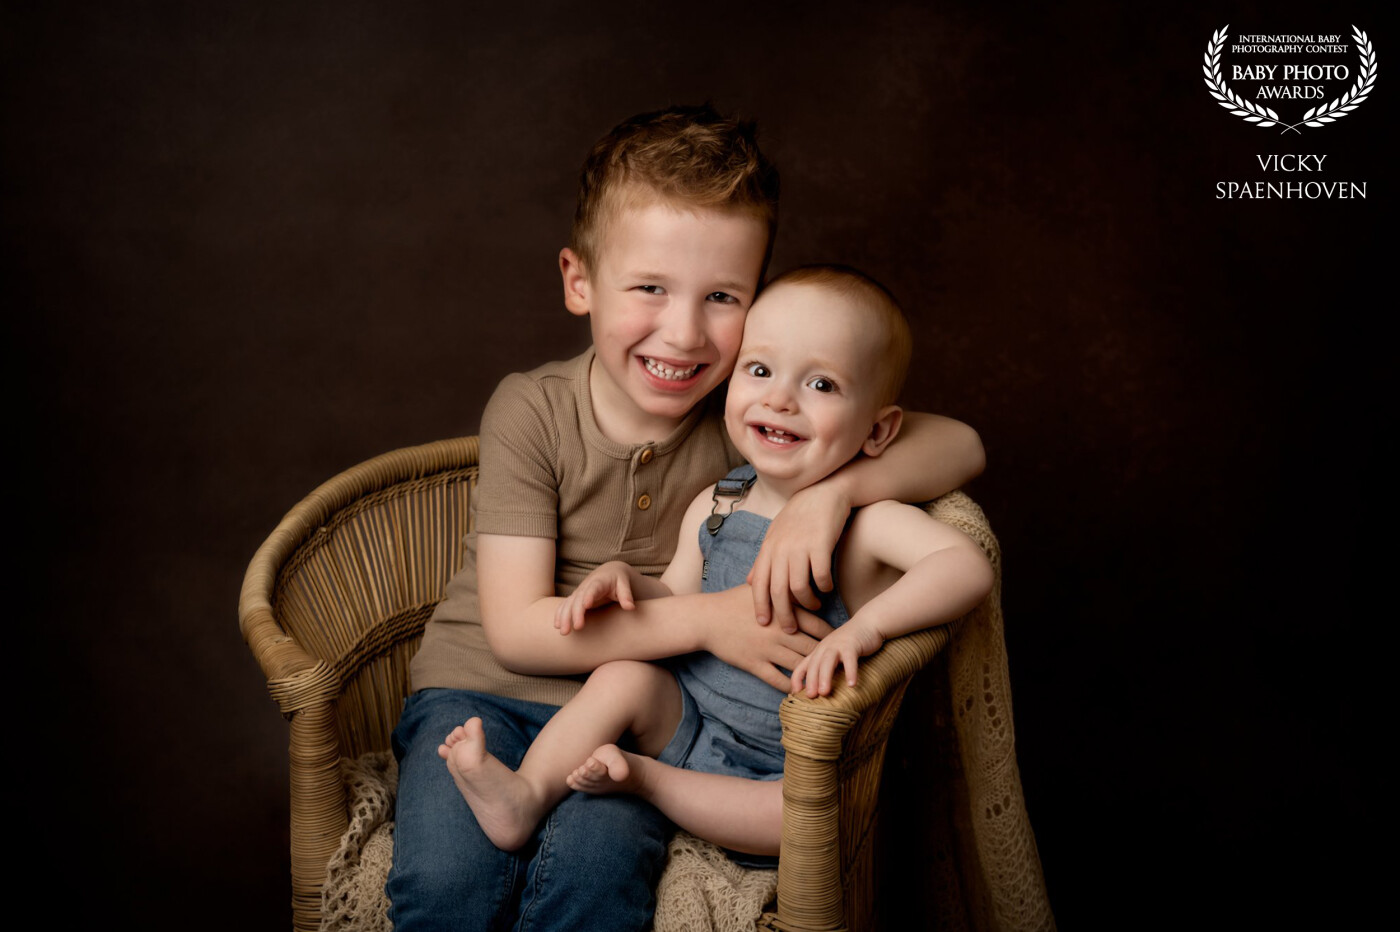 Little Otis turned one and came to my studio for a cakesmash and some beautiful portraits with his older brother. They were so cute together. I love their expressions and their connection.